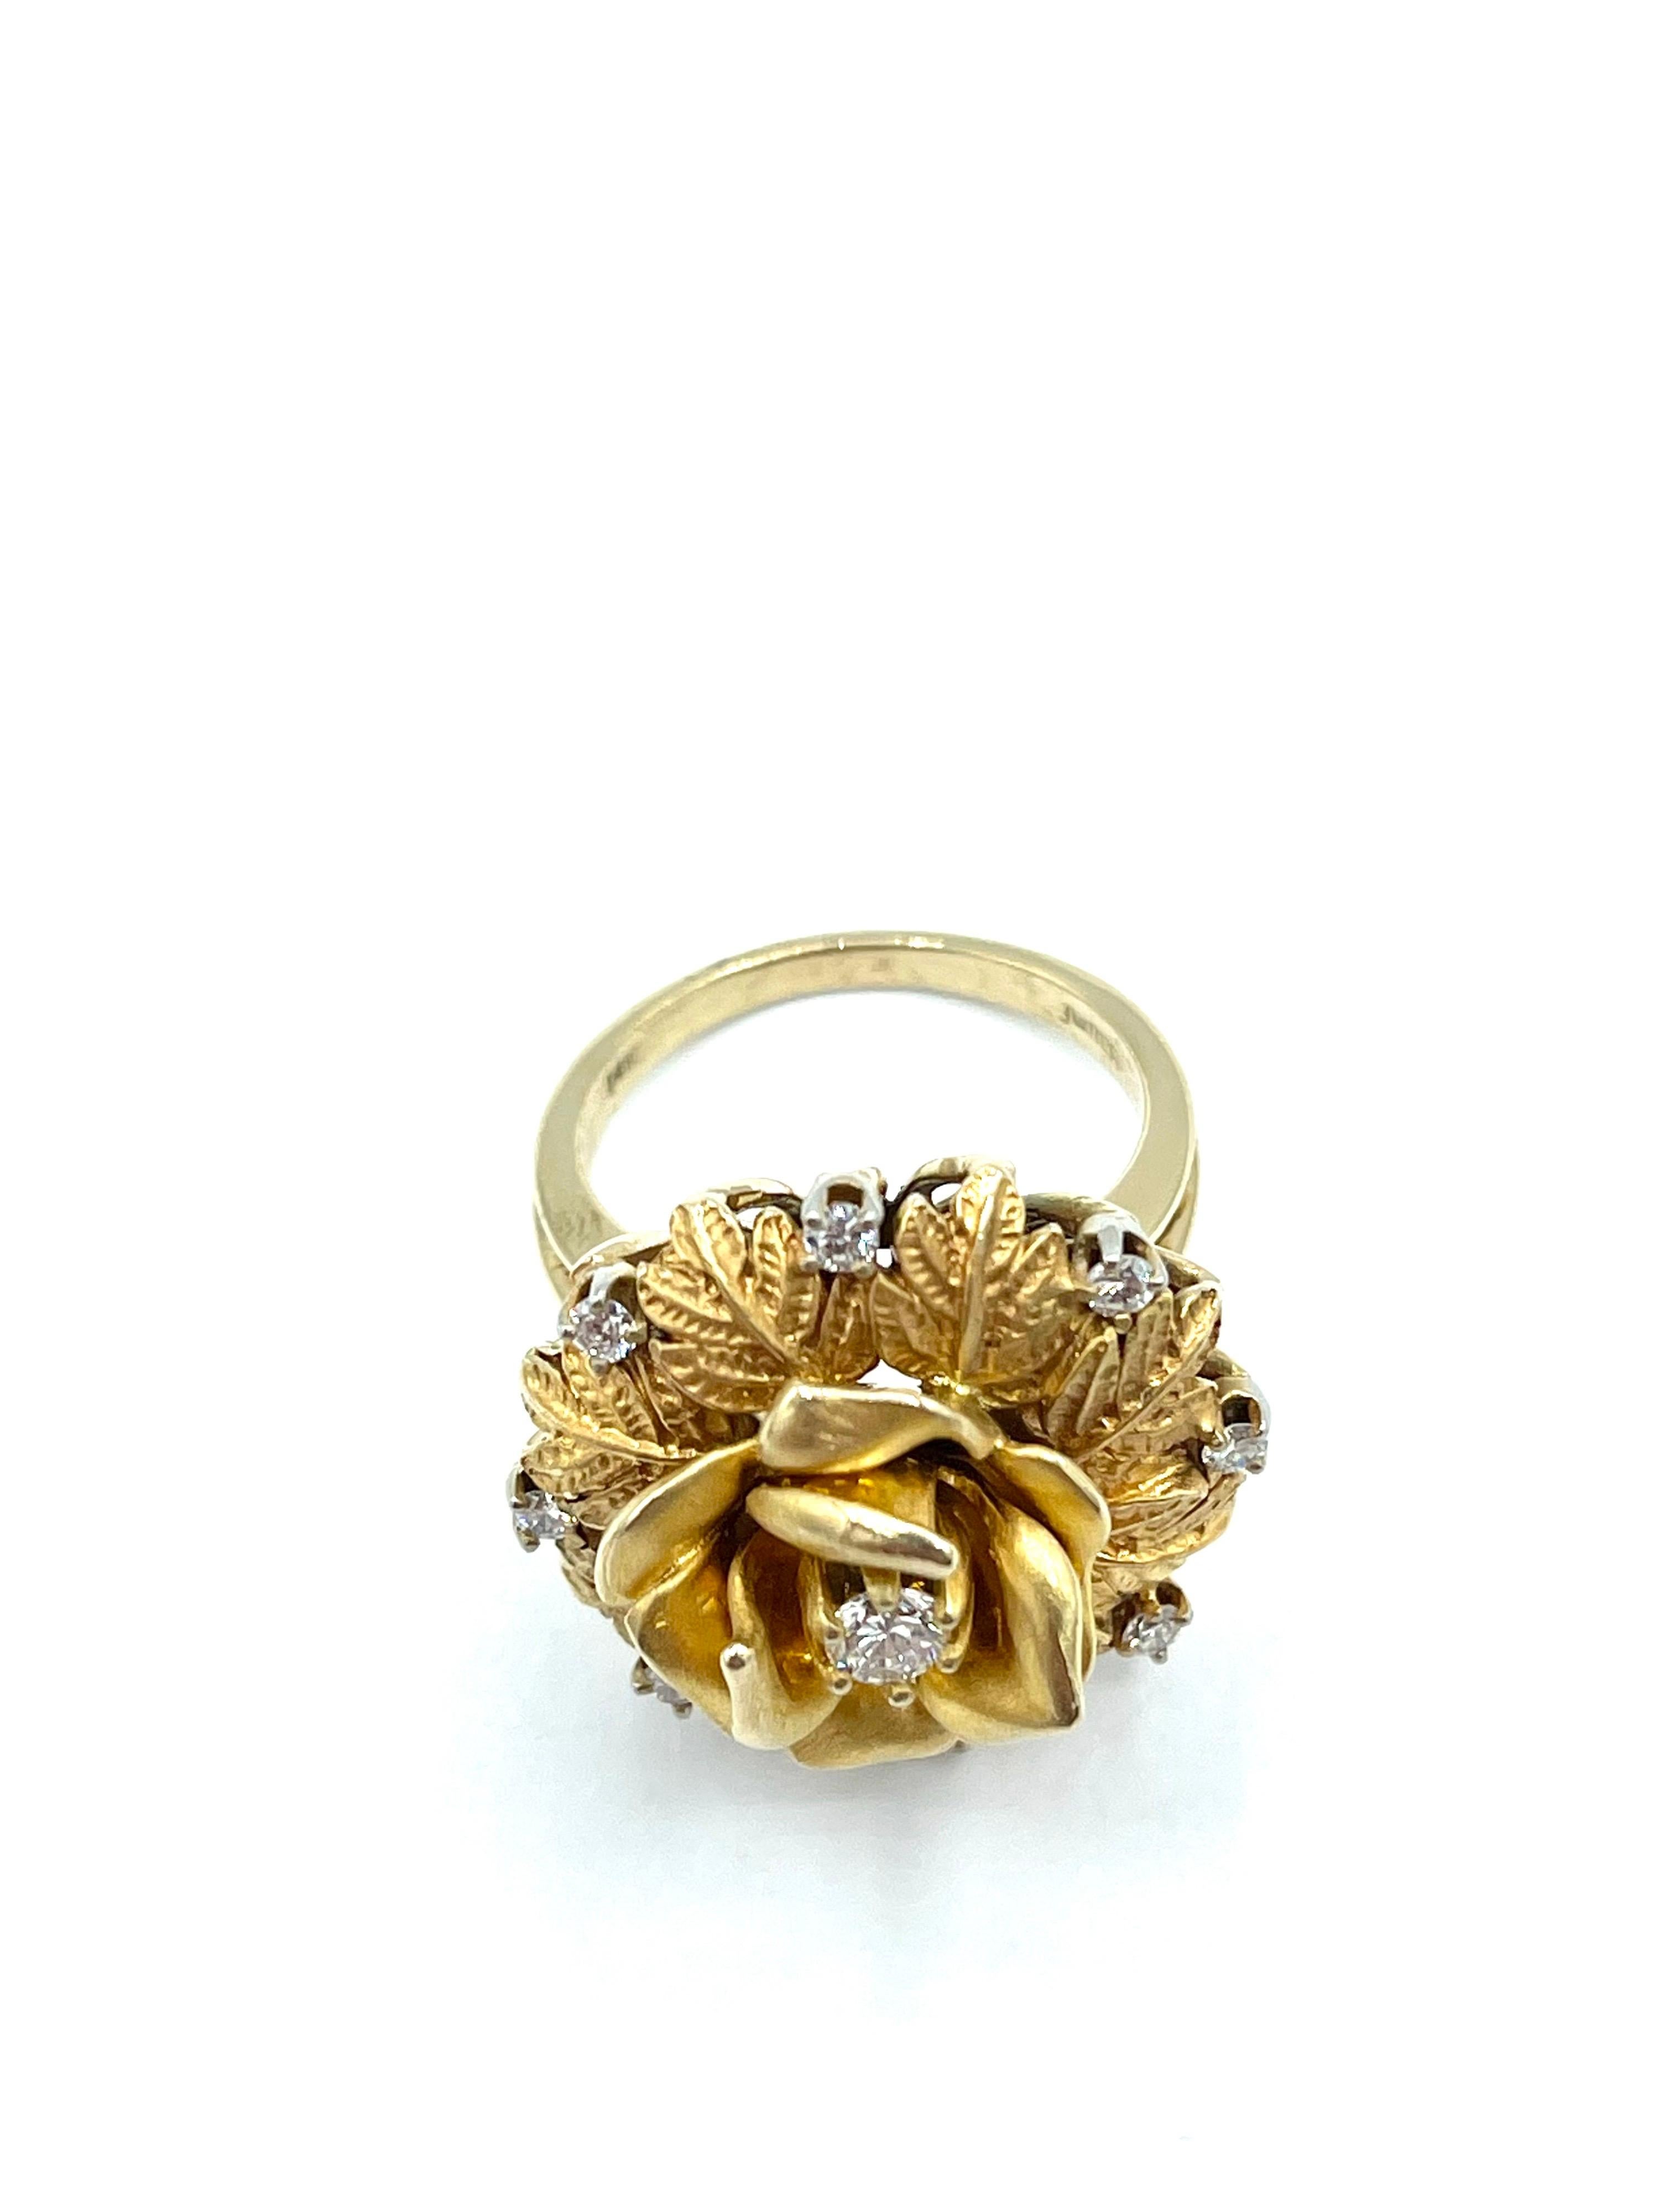 Women's or Men's 0.36 Carat Round Brilliant Diamond and Textured 18K Gold Flower Cocktail Ring For Sale